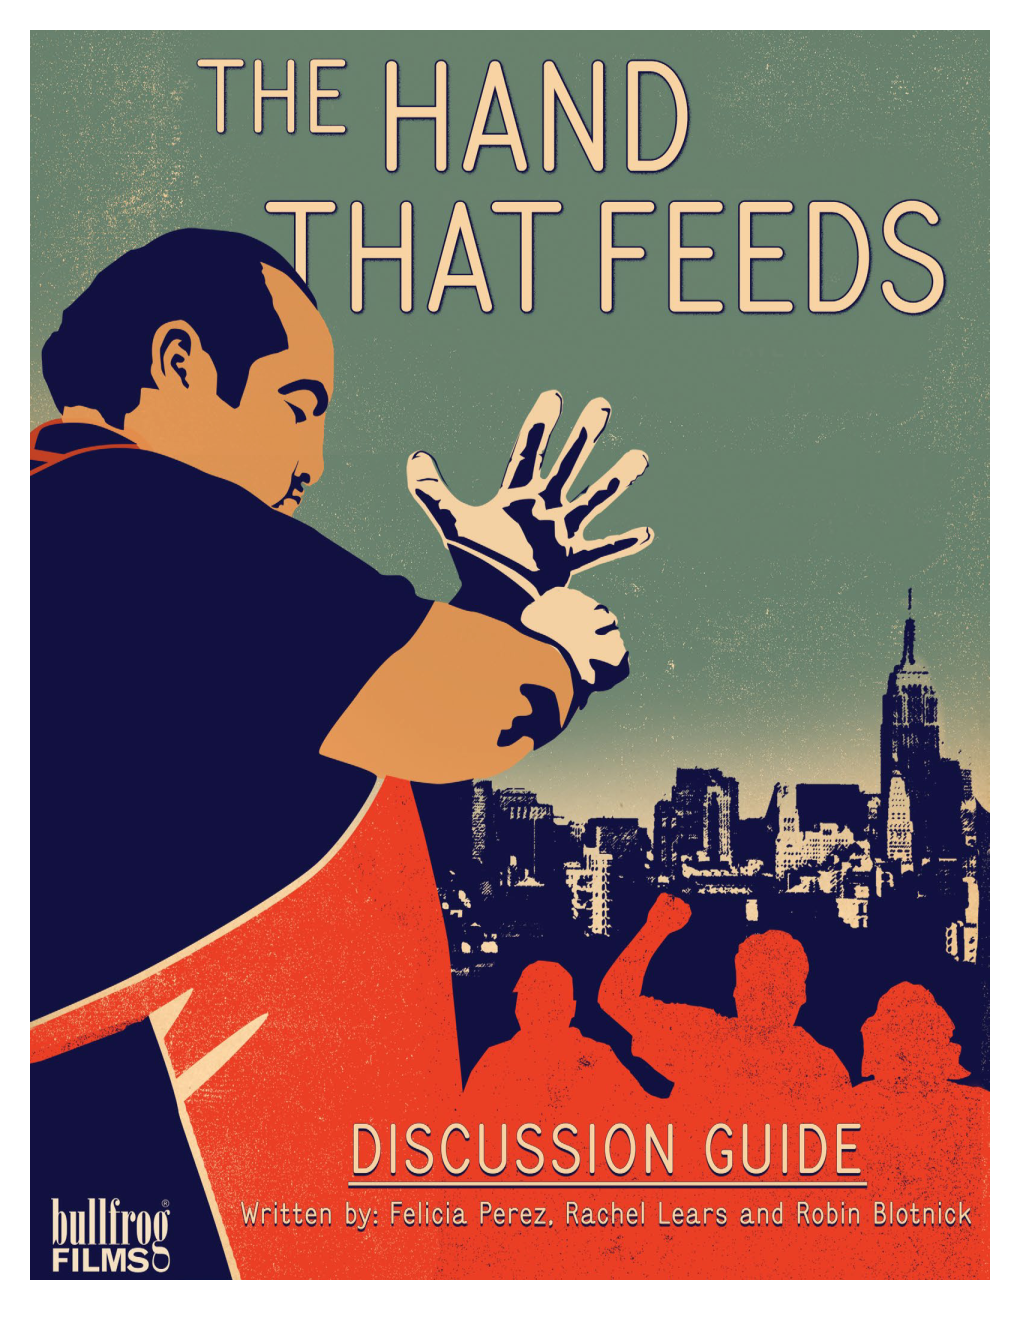 The Hand That Feeds — Discussion Guide